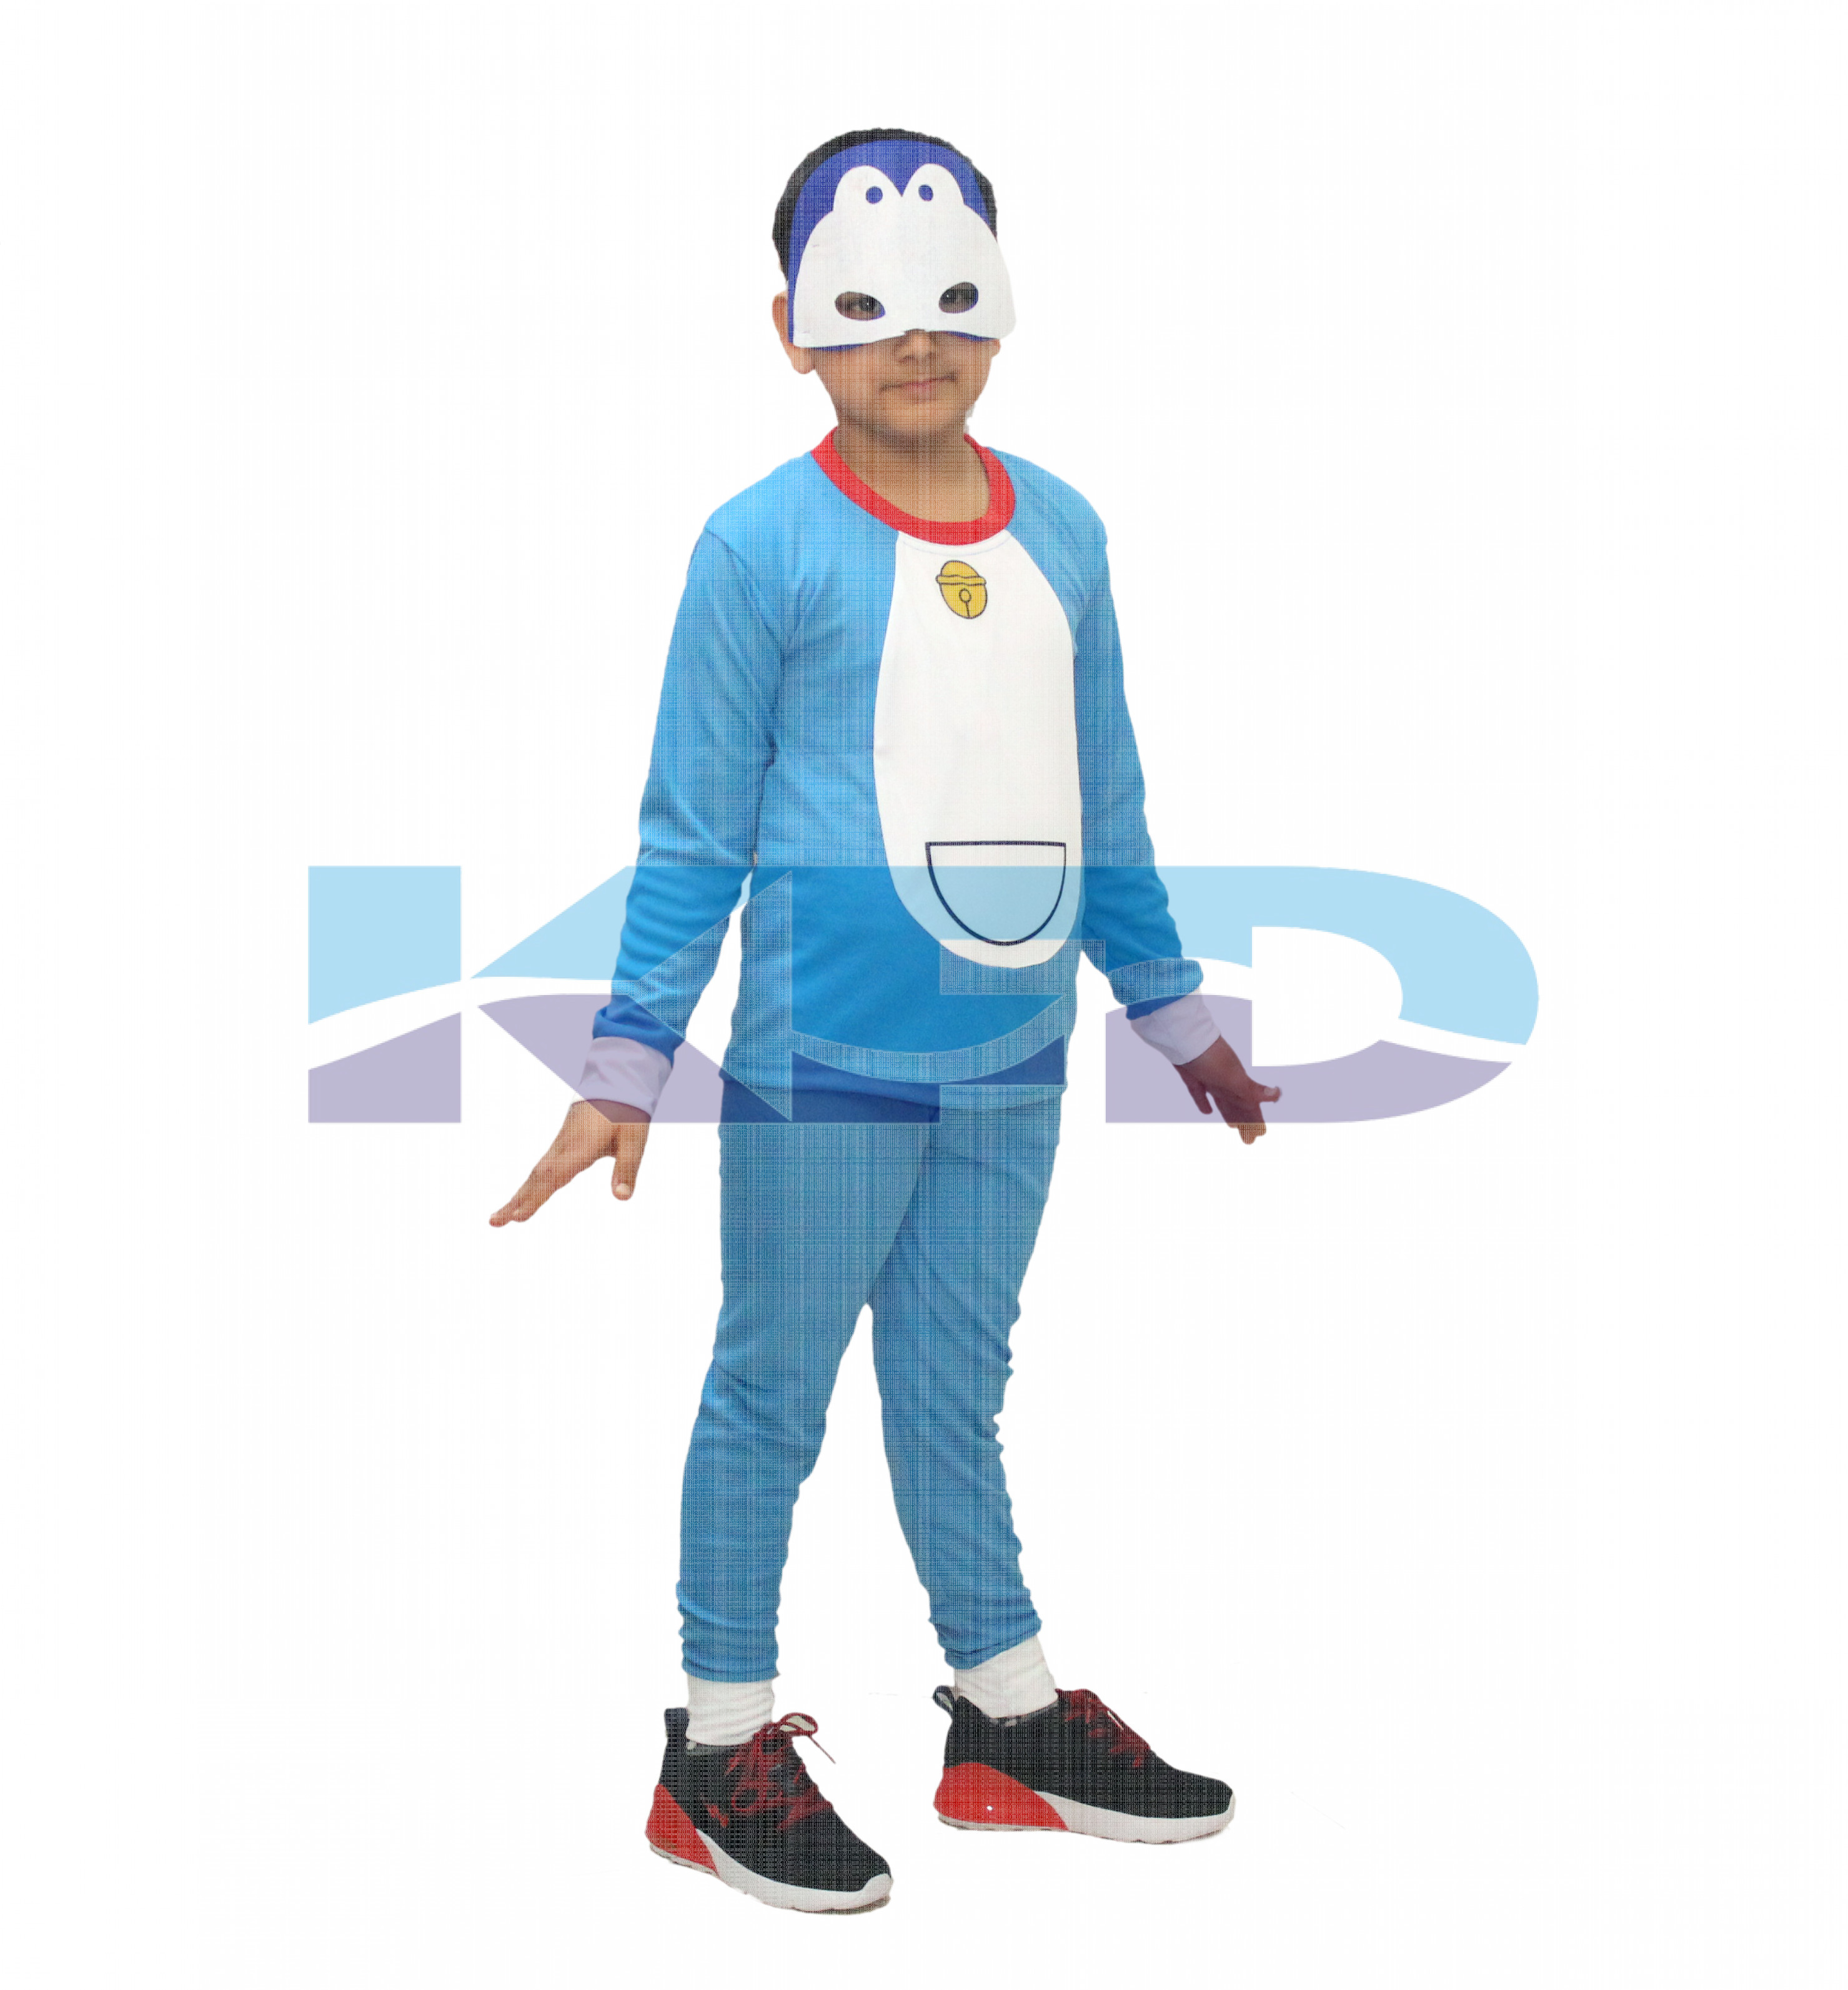 Dori Cartoon fancy dress for kids,Cartoon/superhero Costume for School Annual function/Theme Party/Competition/Stage Shows Dress